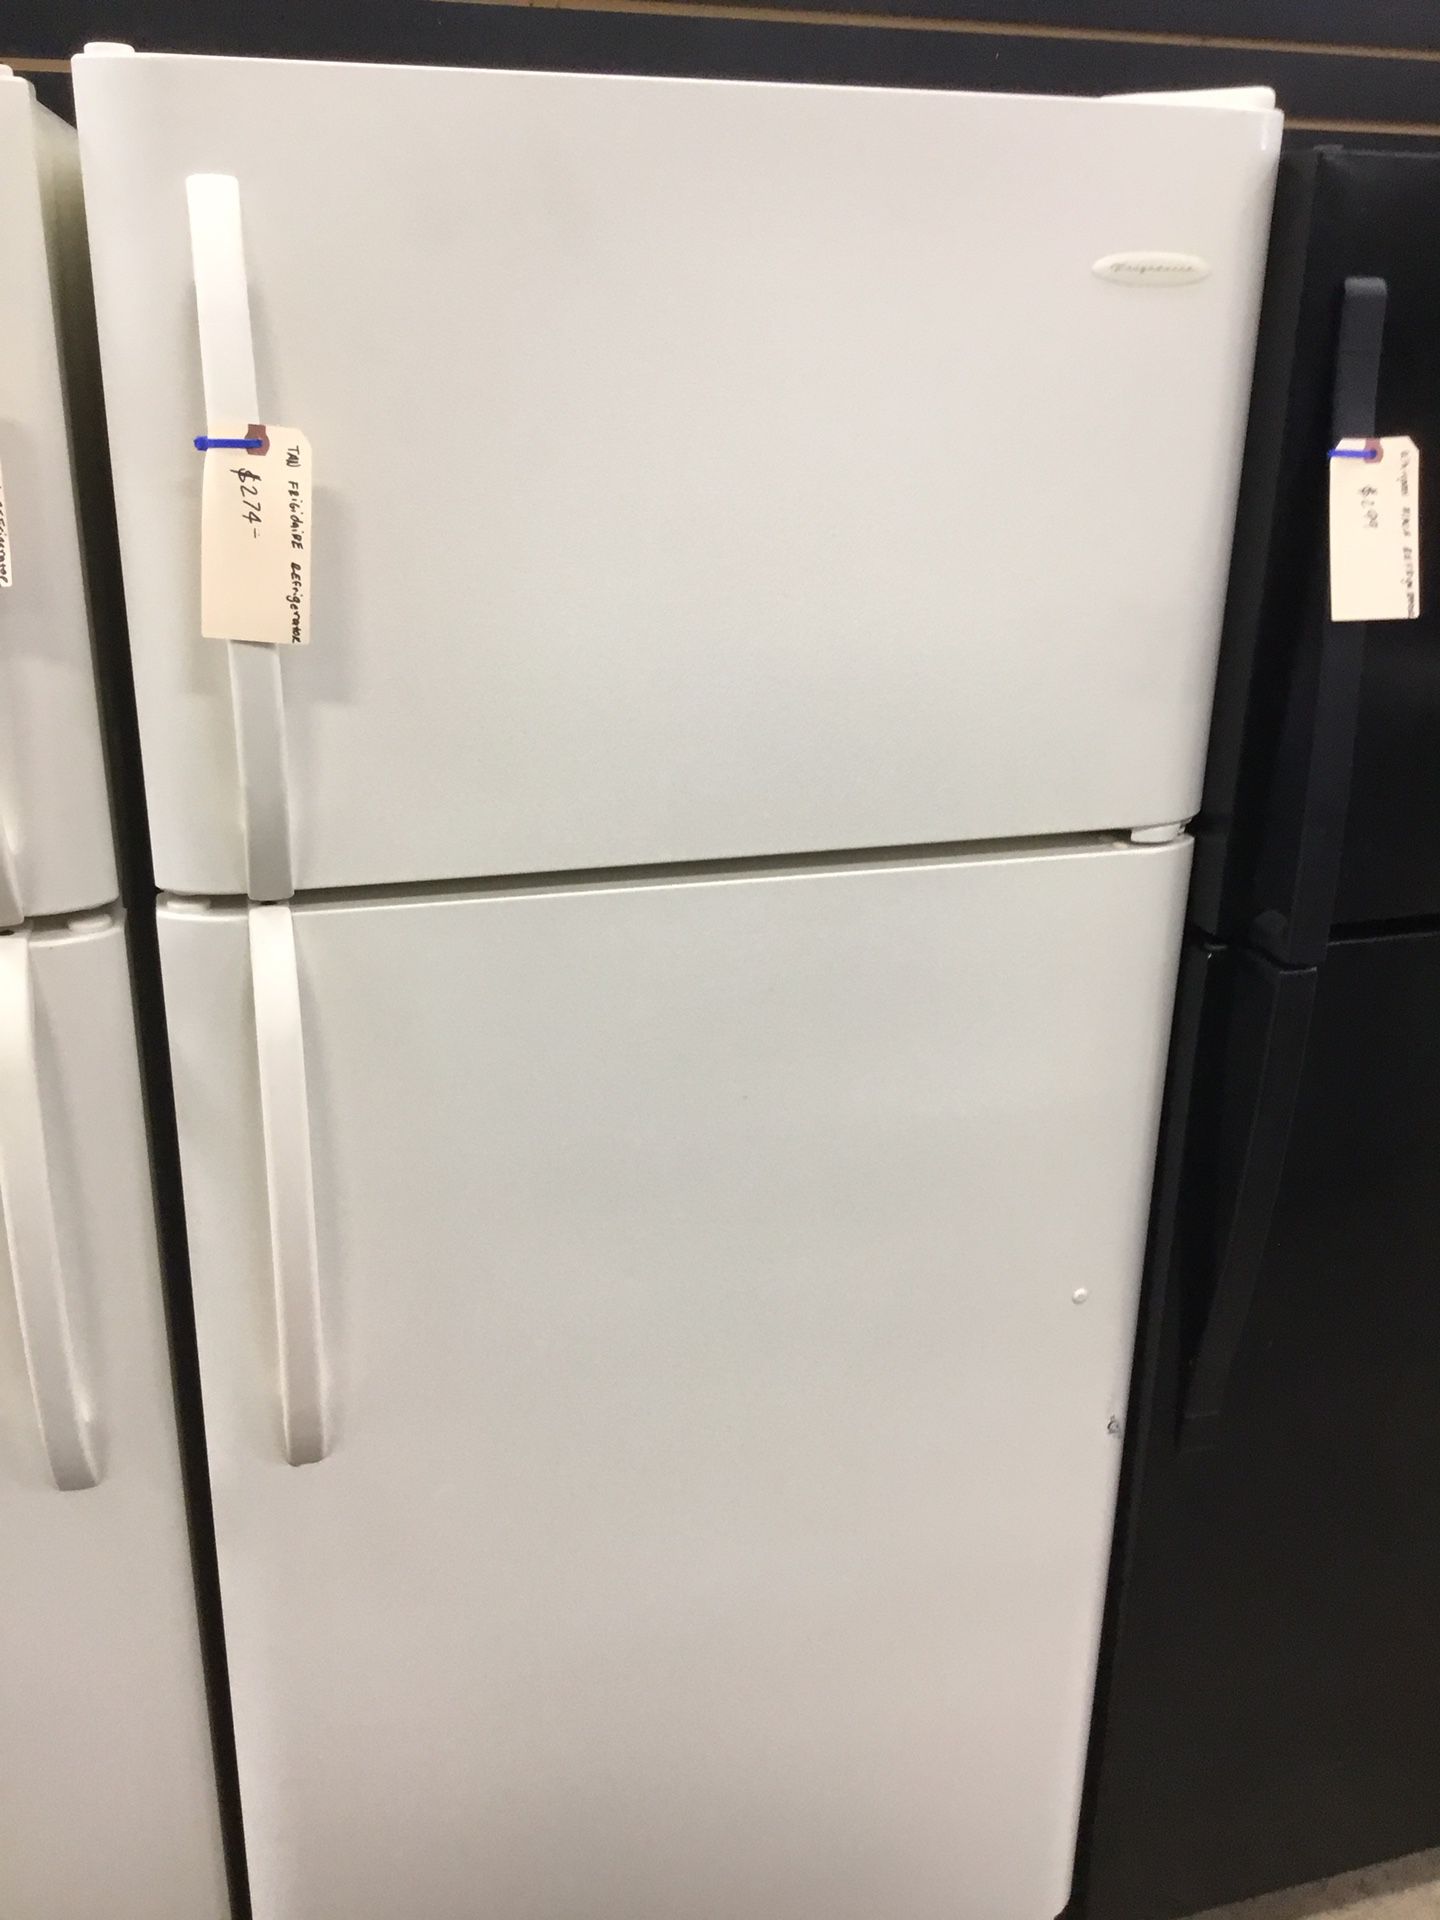 Tan FRIGIDAIRE TOP OVER BOTTOM for Sale in Indianapolis, IN - OfferUp